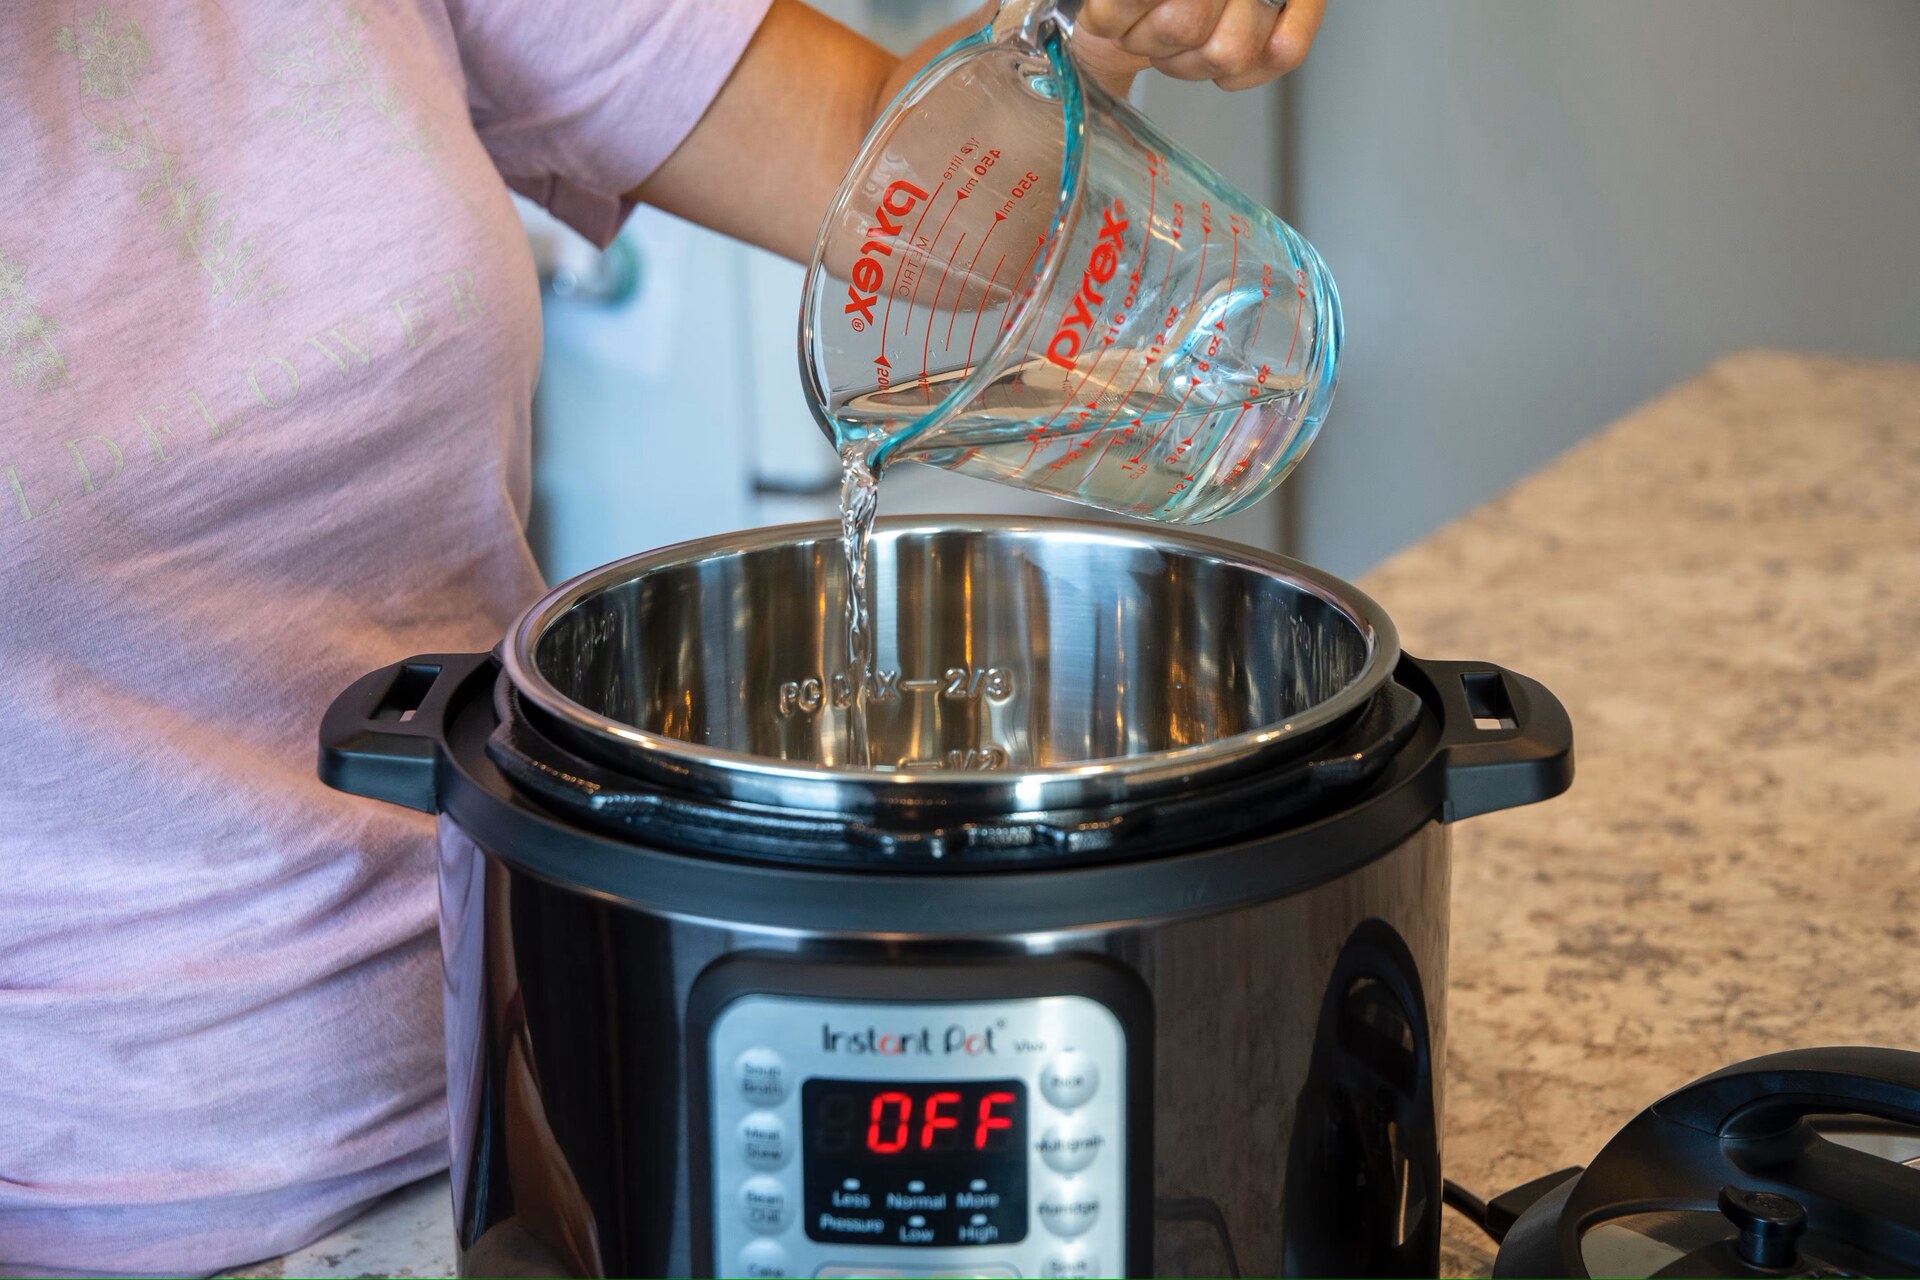 How to use an electric pressure cooker